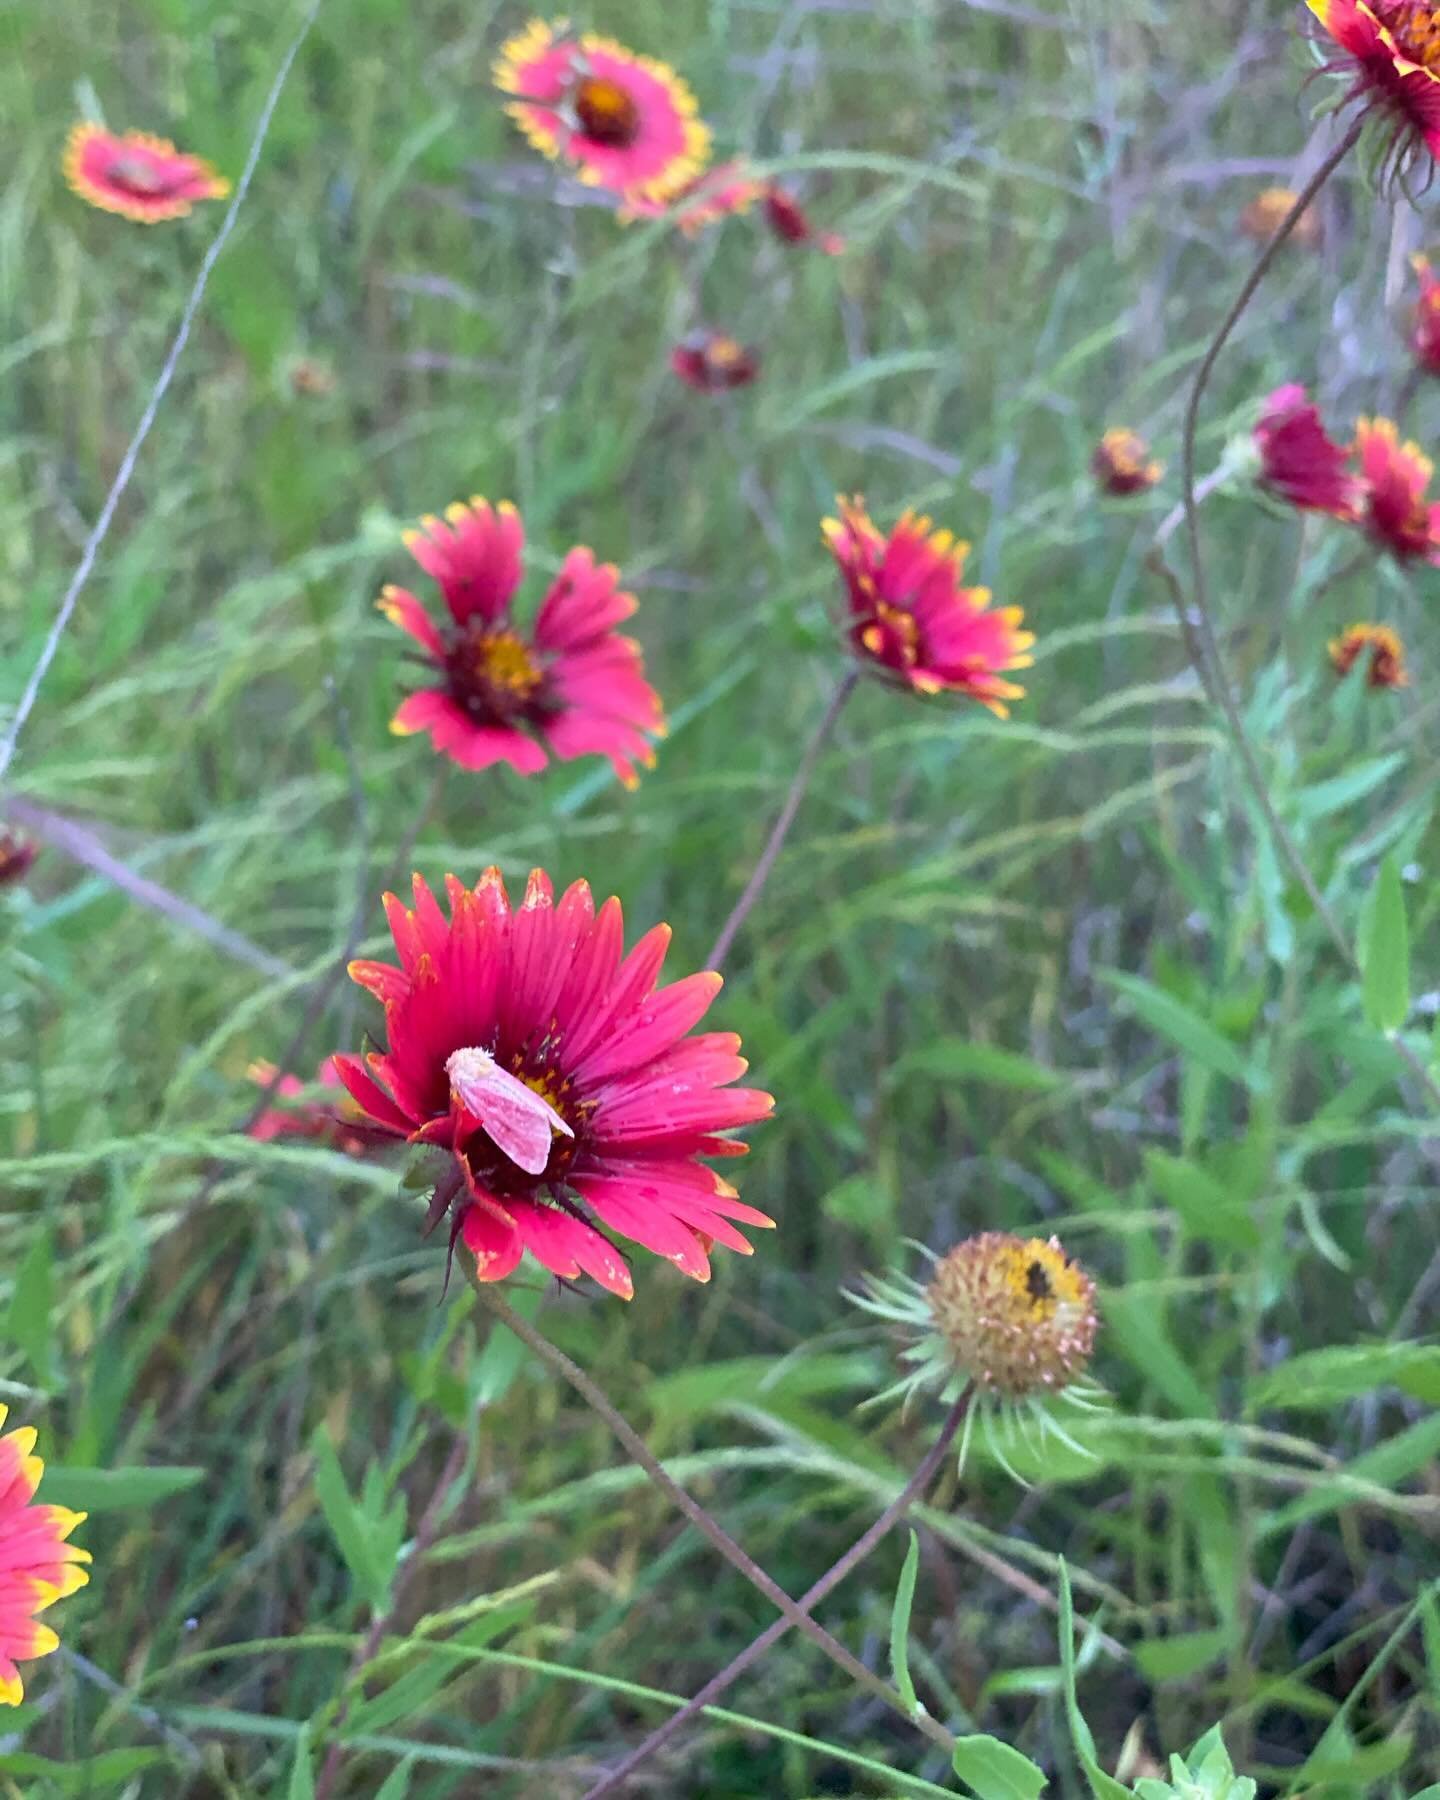 Inspiration all around&hellip; this from a walk, now a couple of weeks ago. The Indian Blankets, also named Firewheels, have faded and Coreopsis has taken over. #nature #hillcountrywildflowers